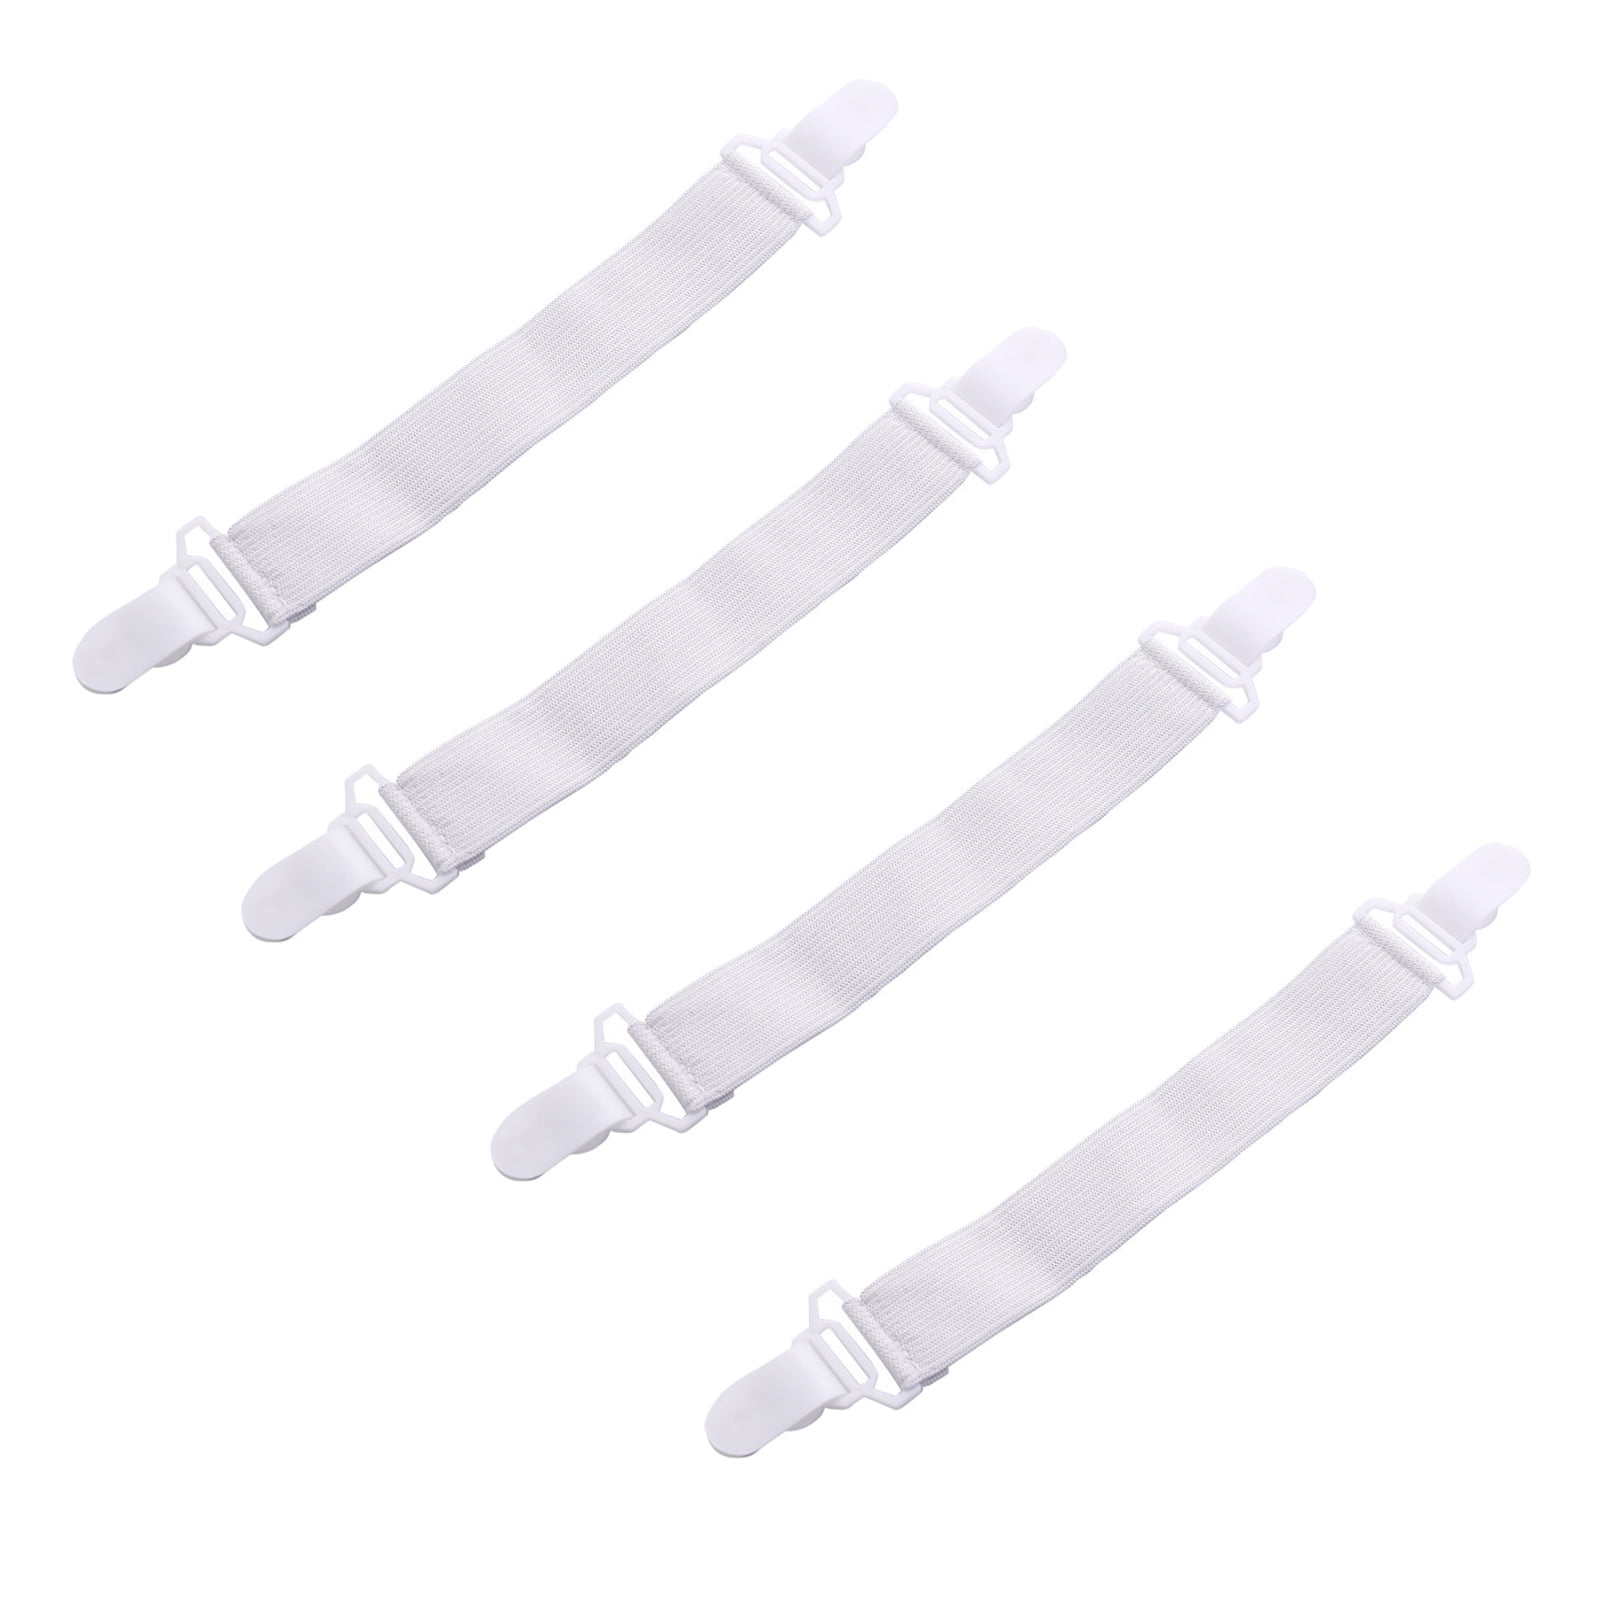 Petty Well Set of 4 Nylon Elastic Flat Sheet Fix Buckle Strong Plastic Clips Holder Bed Sheet Fasteners Clip Bed Sheet Fix Buckle Clips 